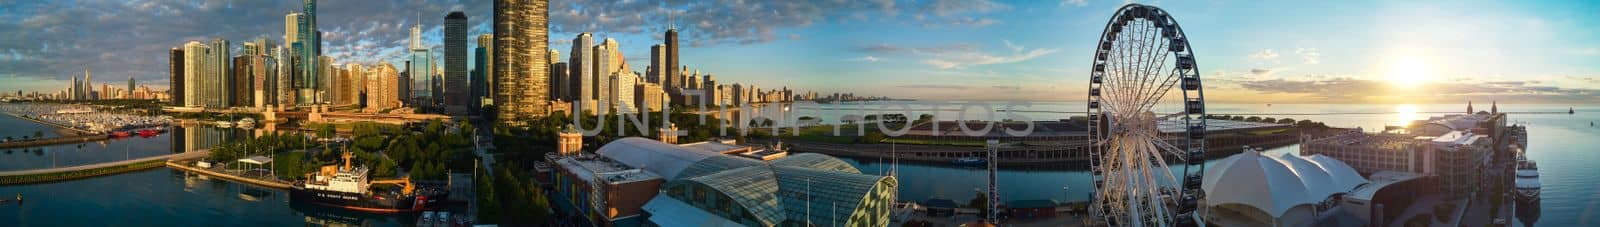 Stunning panorama of Chicago Navy Pier at sunrise with ferris wheel and city skyline by njproductions